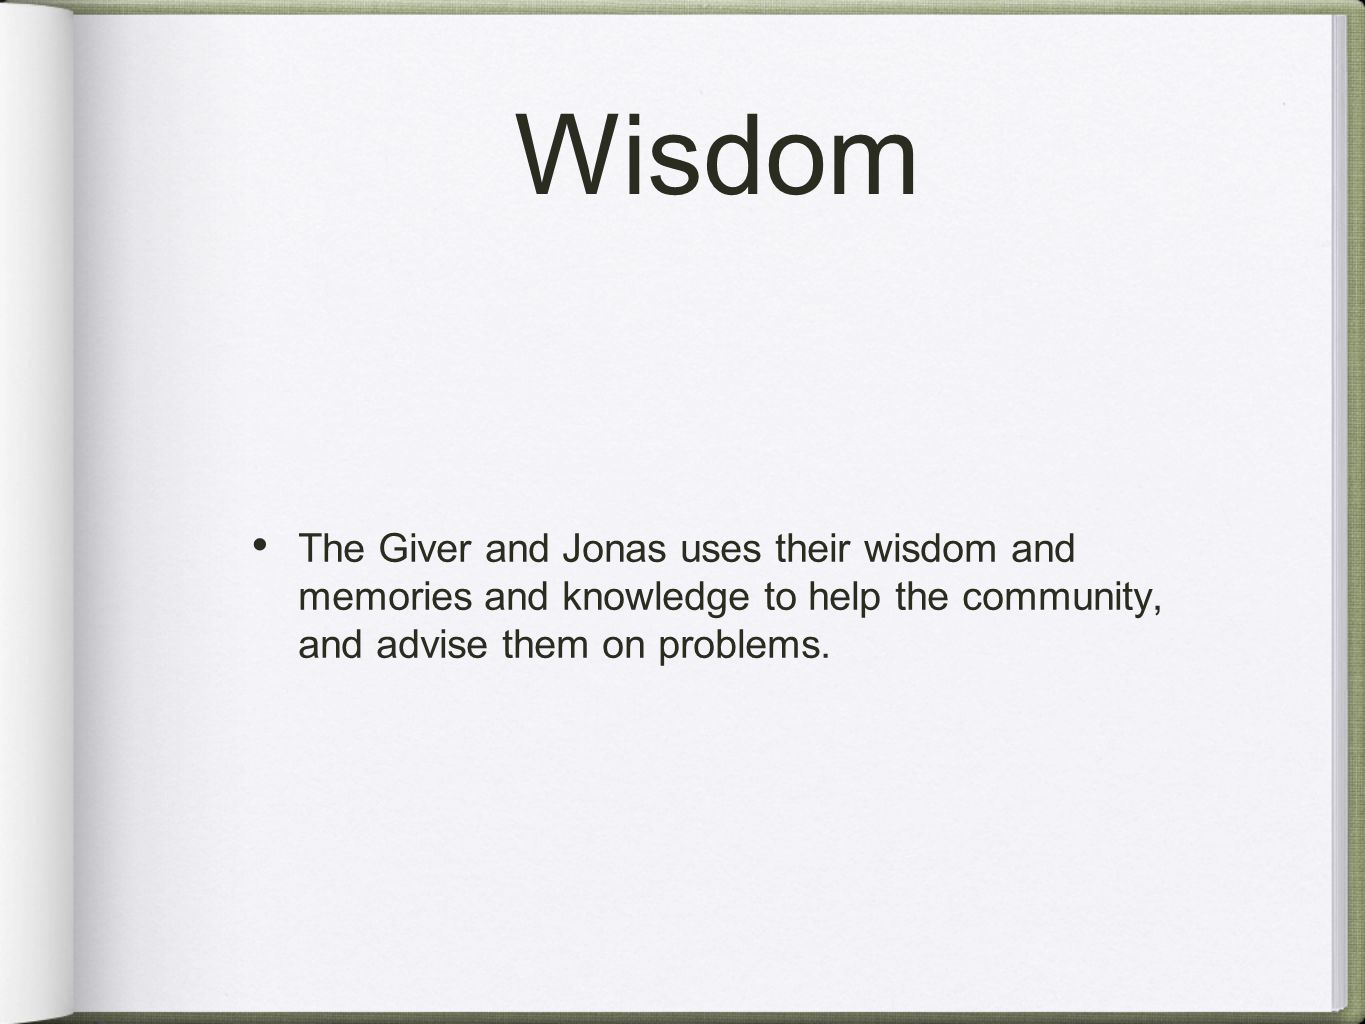 Wisdom The Giver and Jonas uses their wisdom and memories and knowledge to help the community, and advise them on problems.